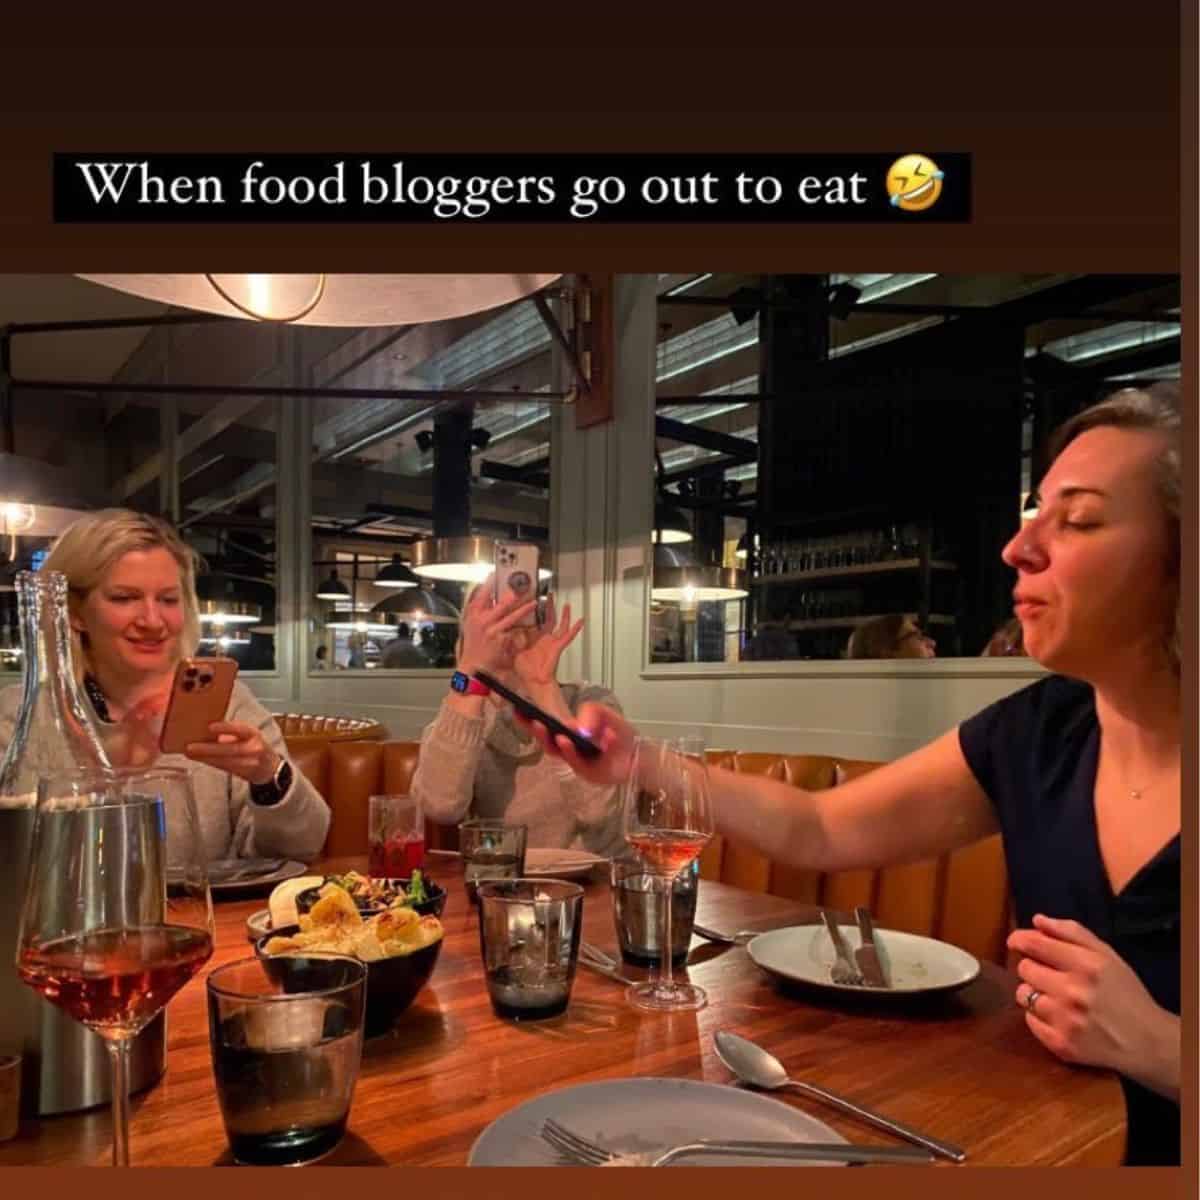 3 women at a restaurant taking photos of food with their phones.